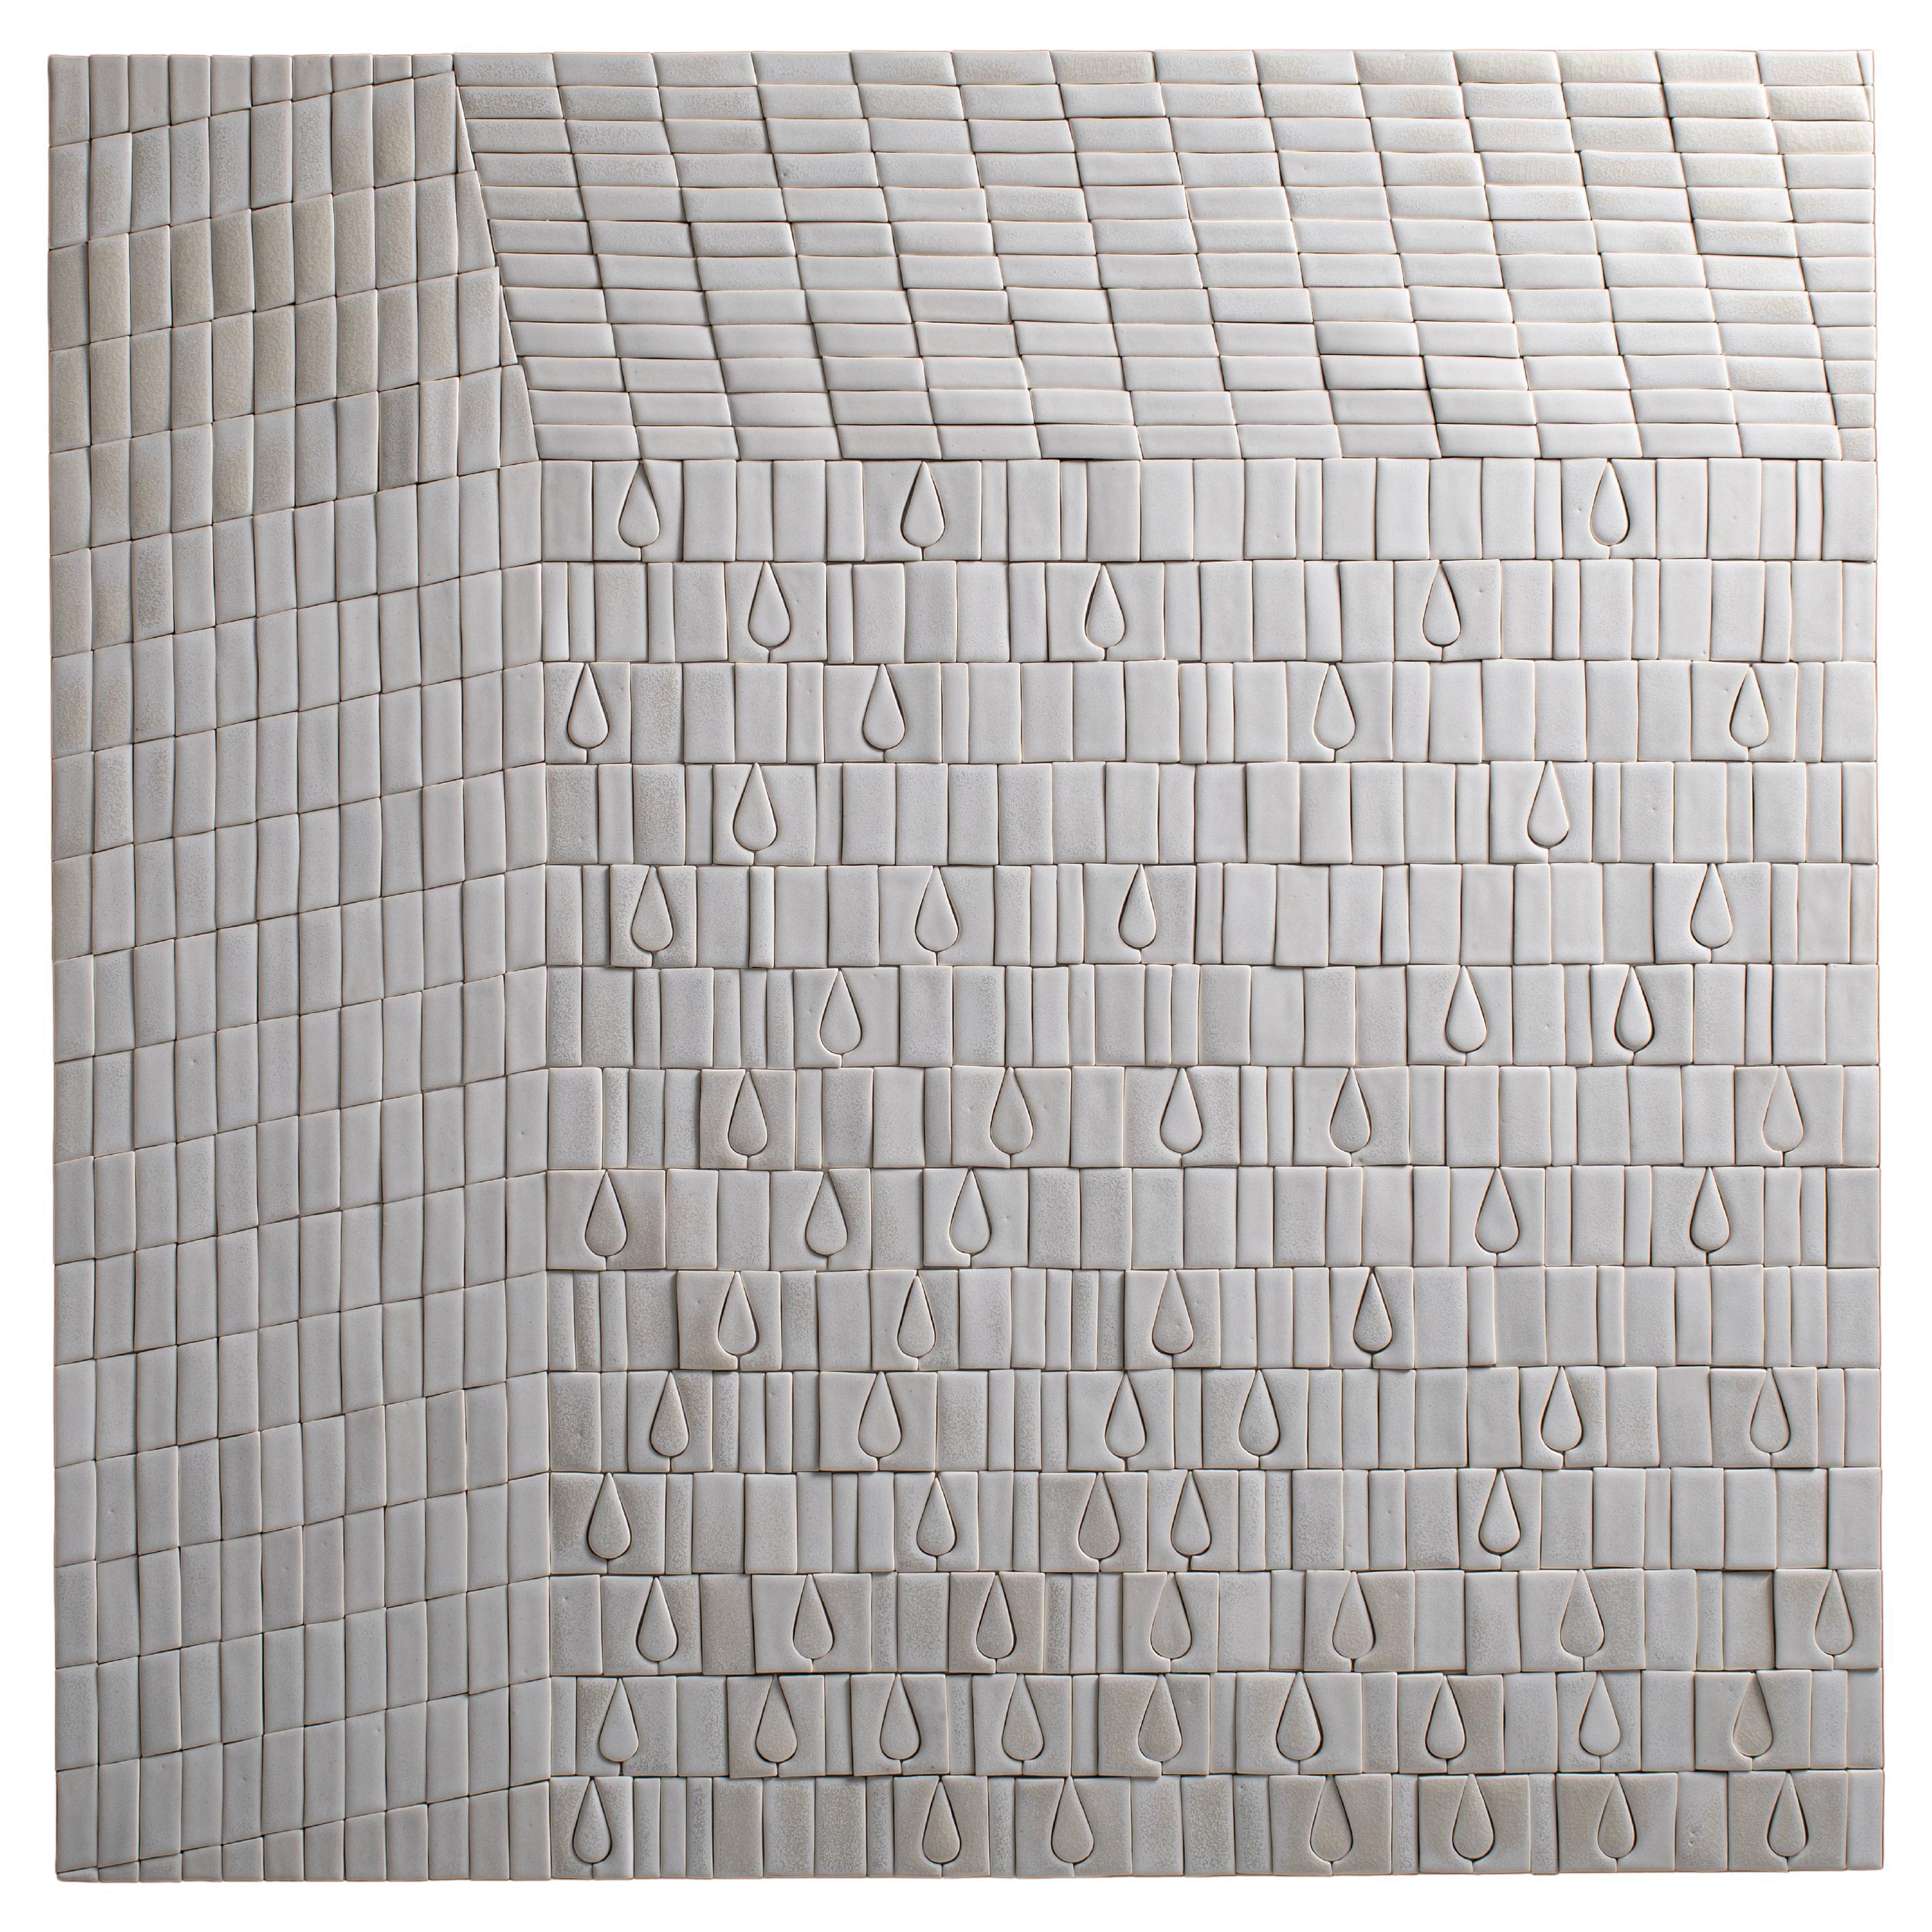 Hand Built and Glazed Porcelain Wall Piece by Kirsi Kivivirta, In-Stock For Sale